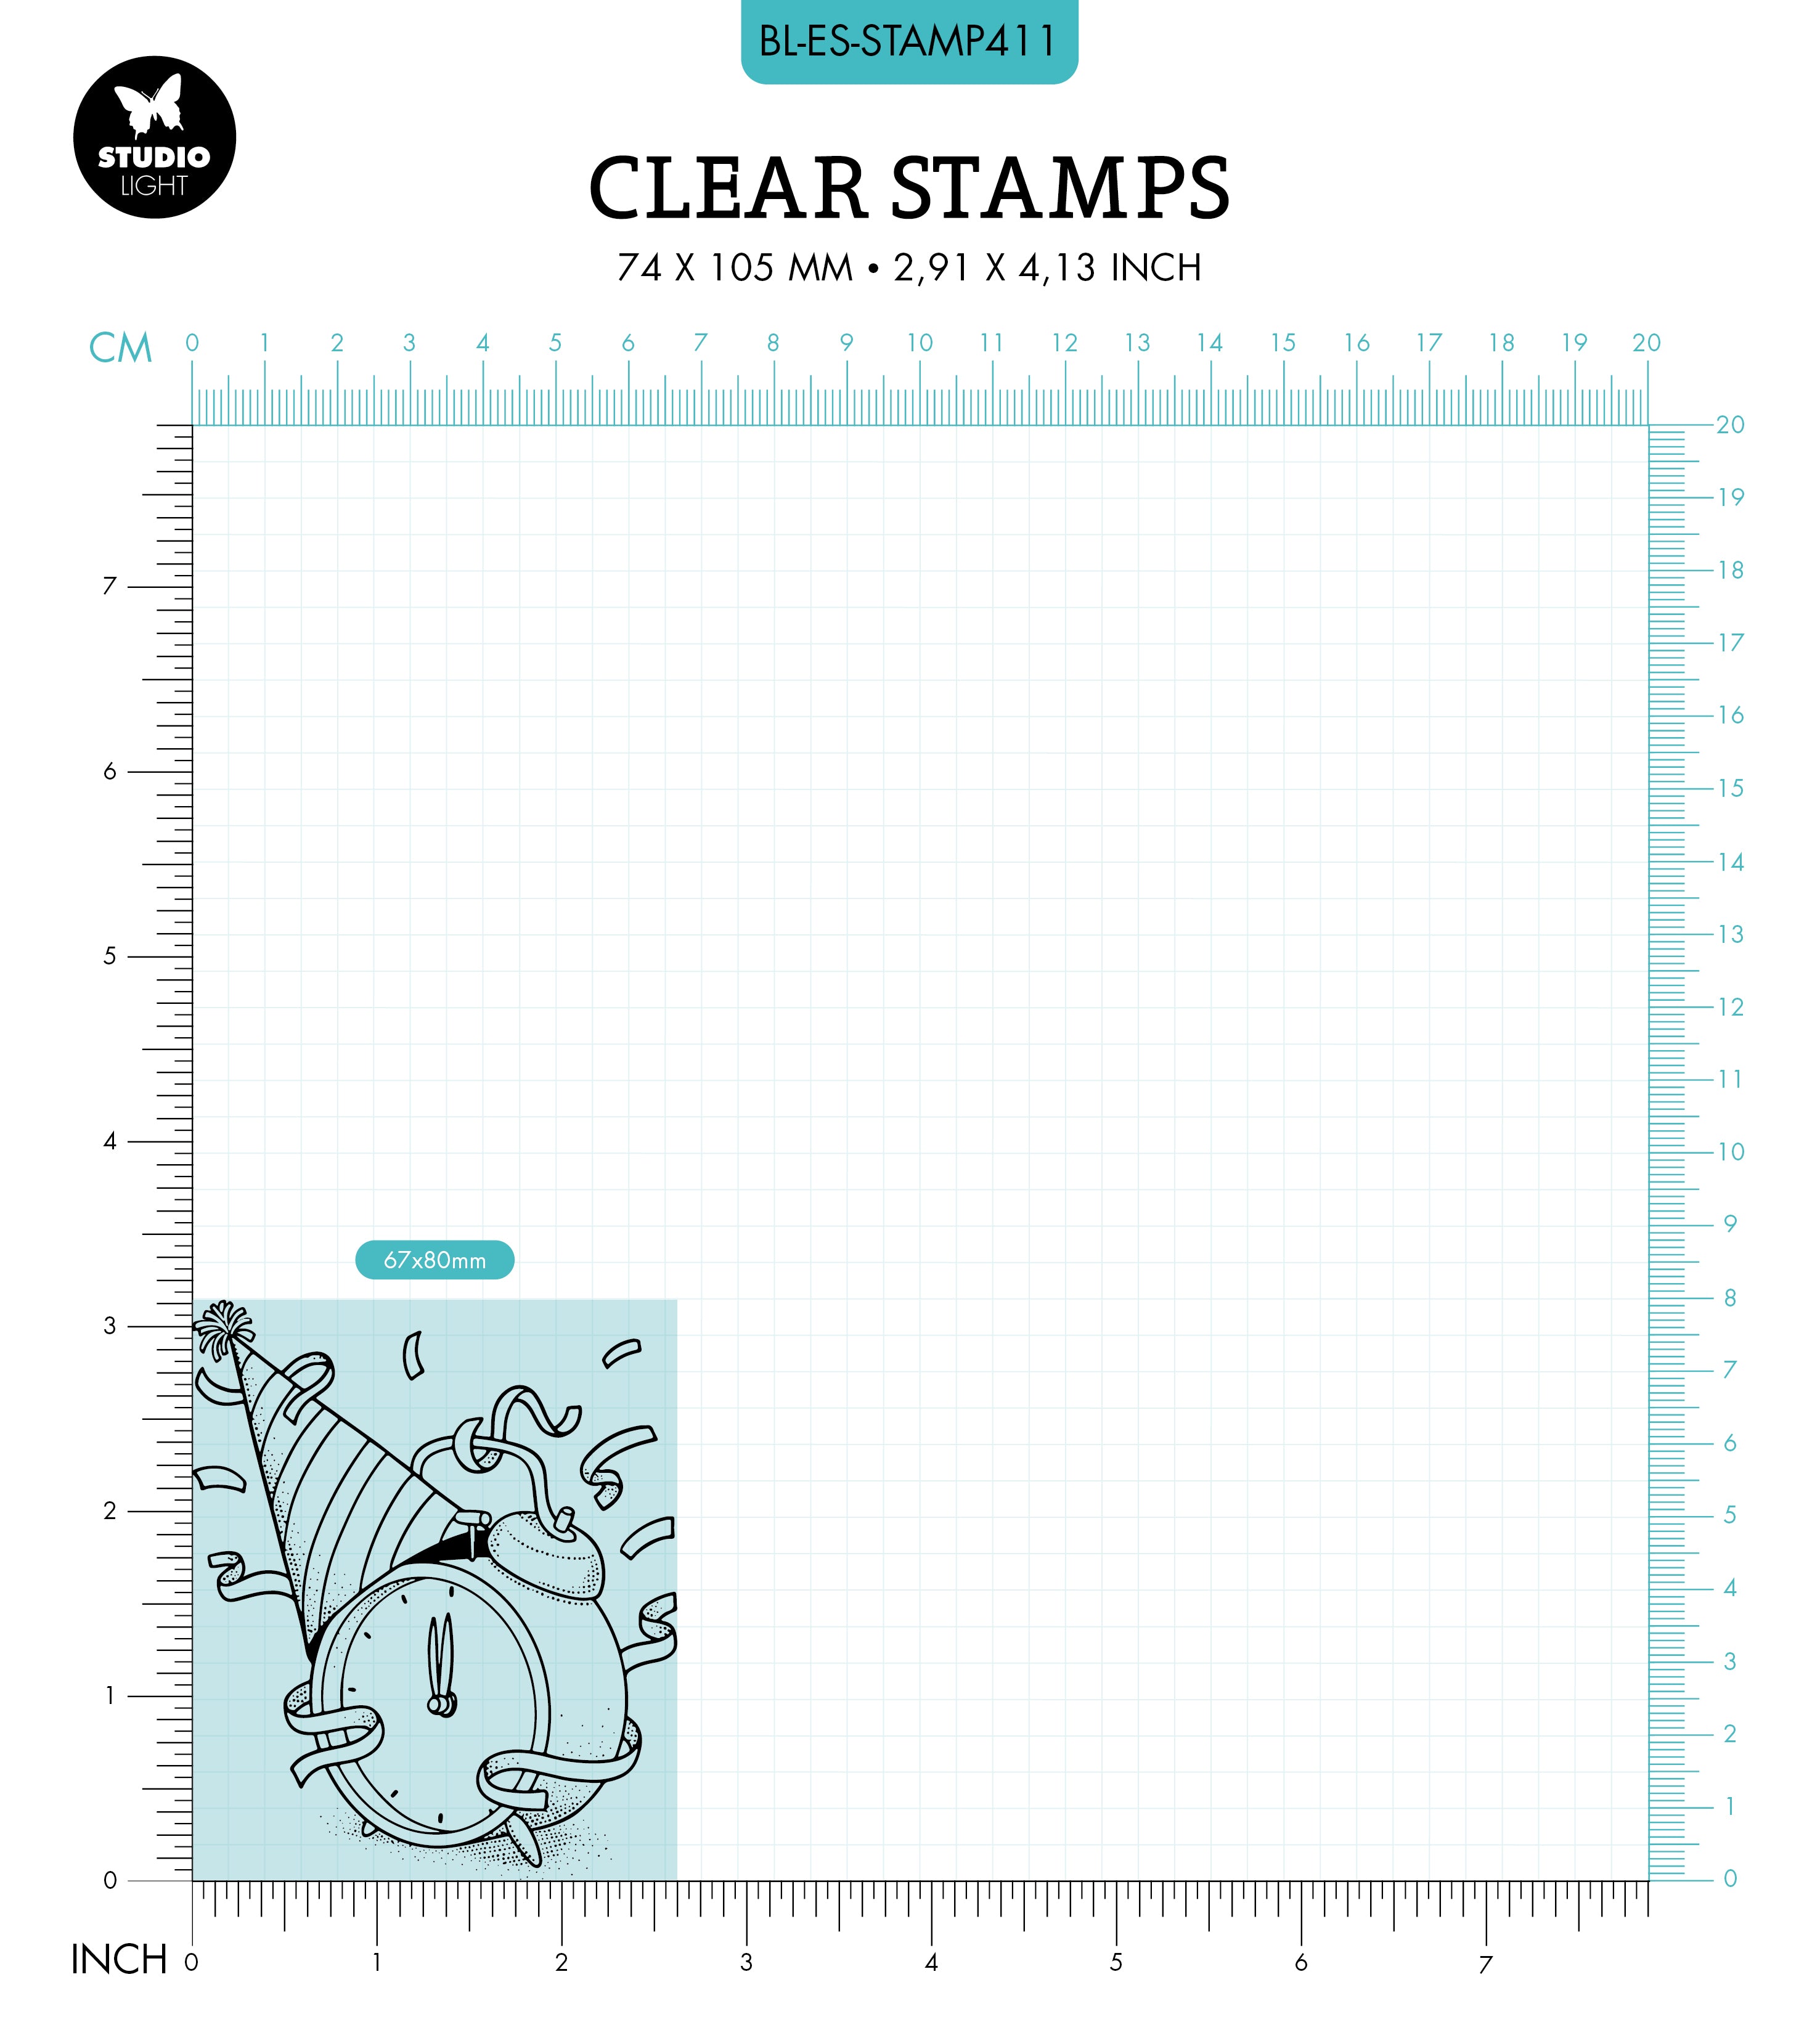 BL Clear Stamp Party Time Essentials 80x67x3mm 1 PC nr.411